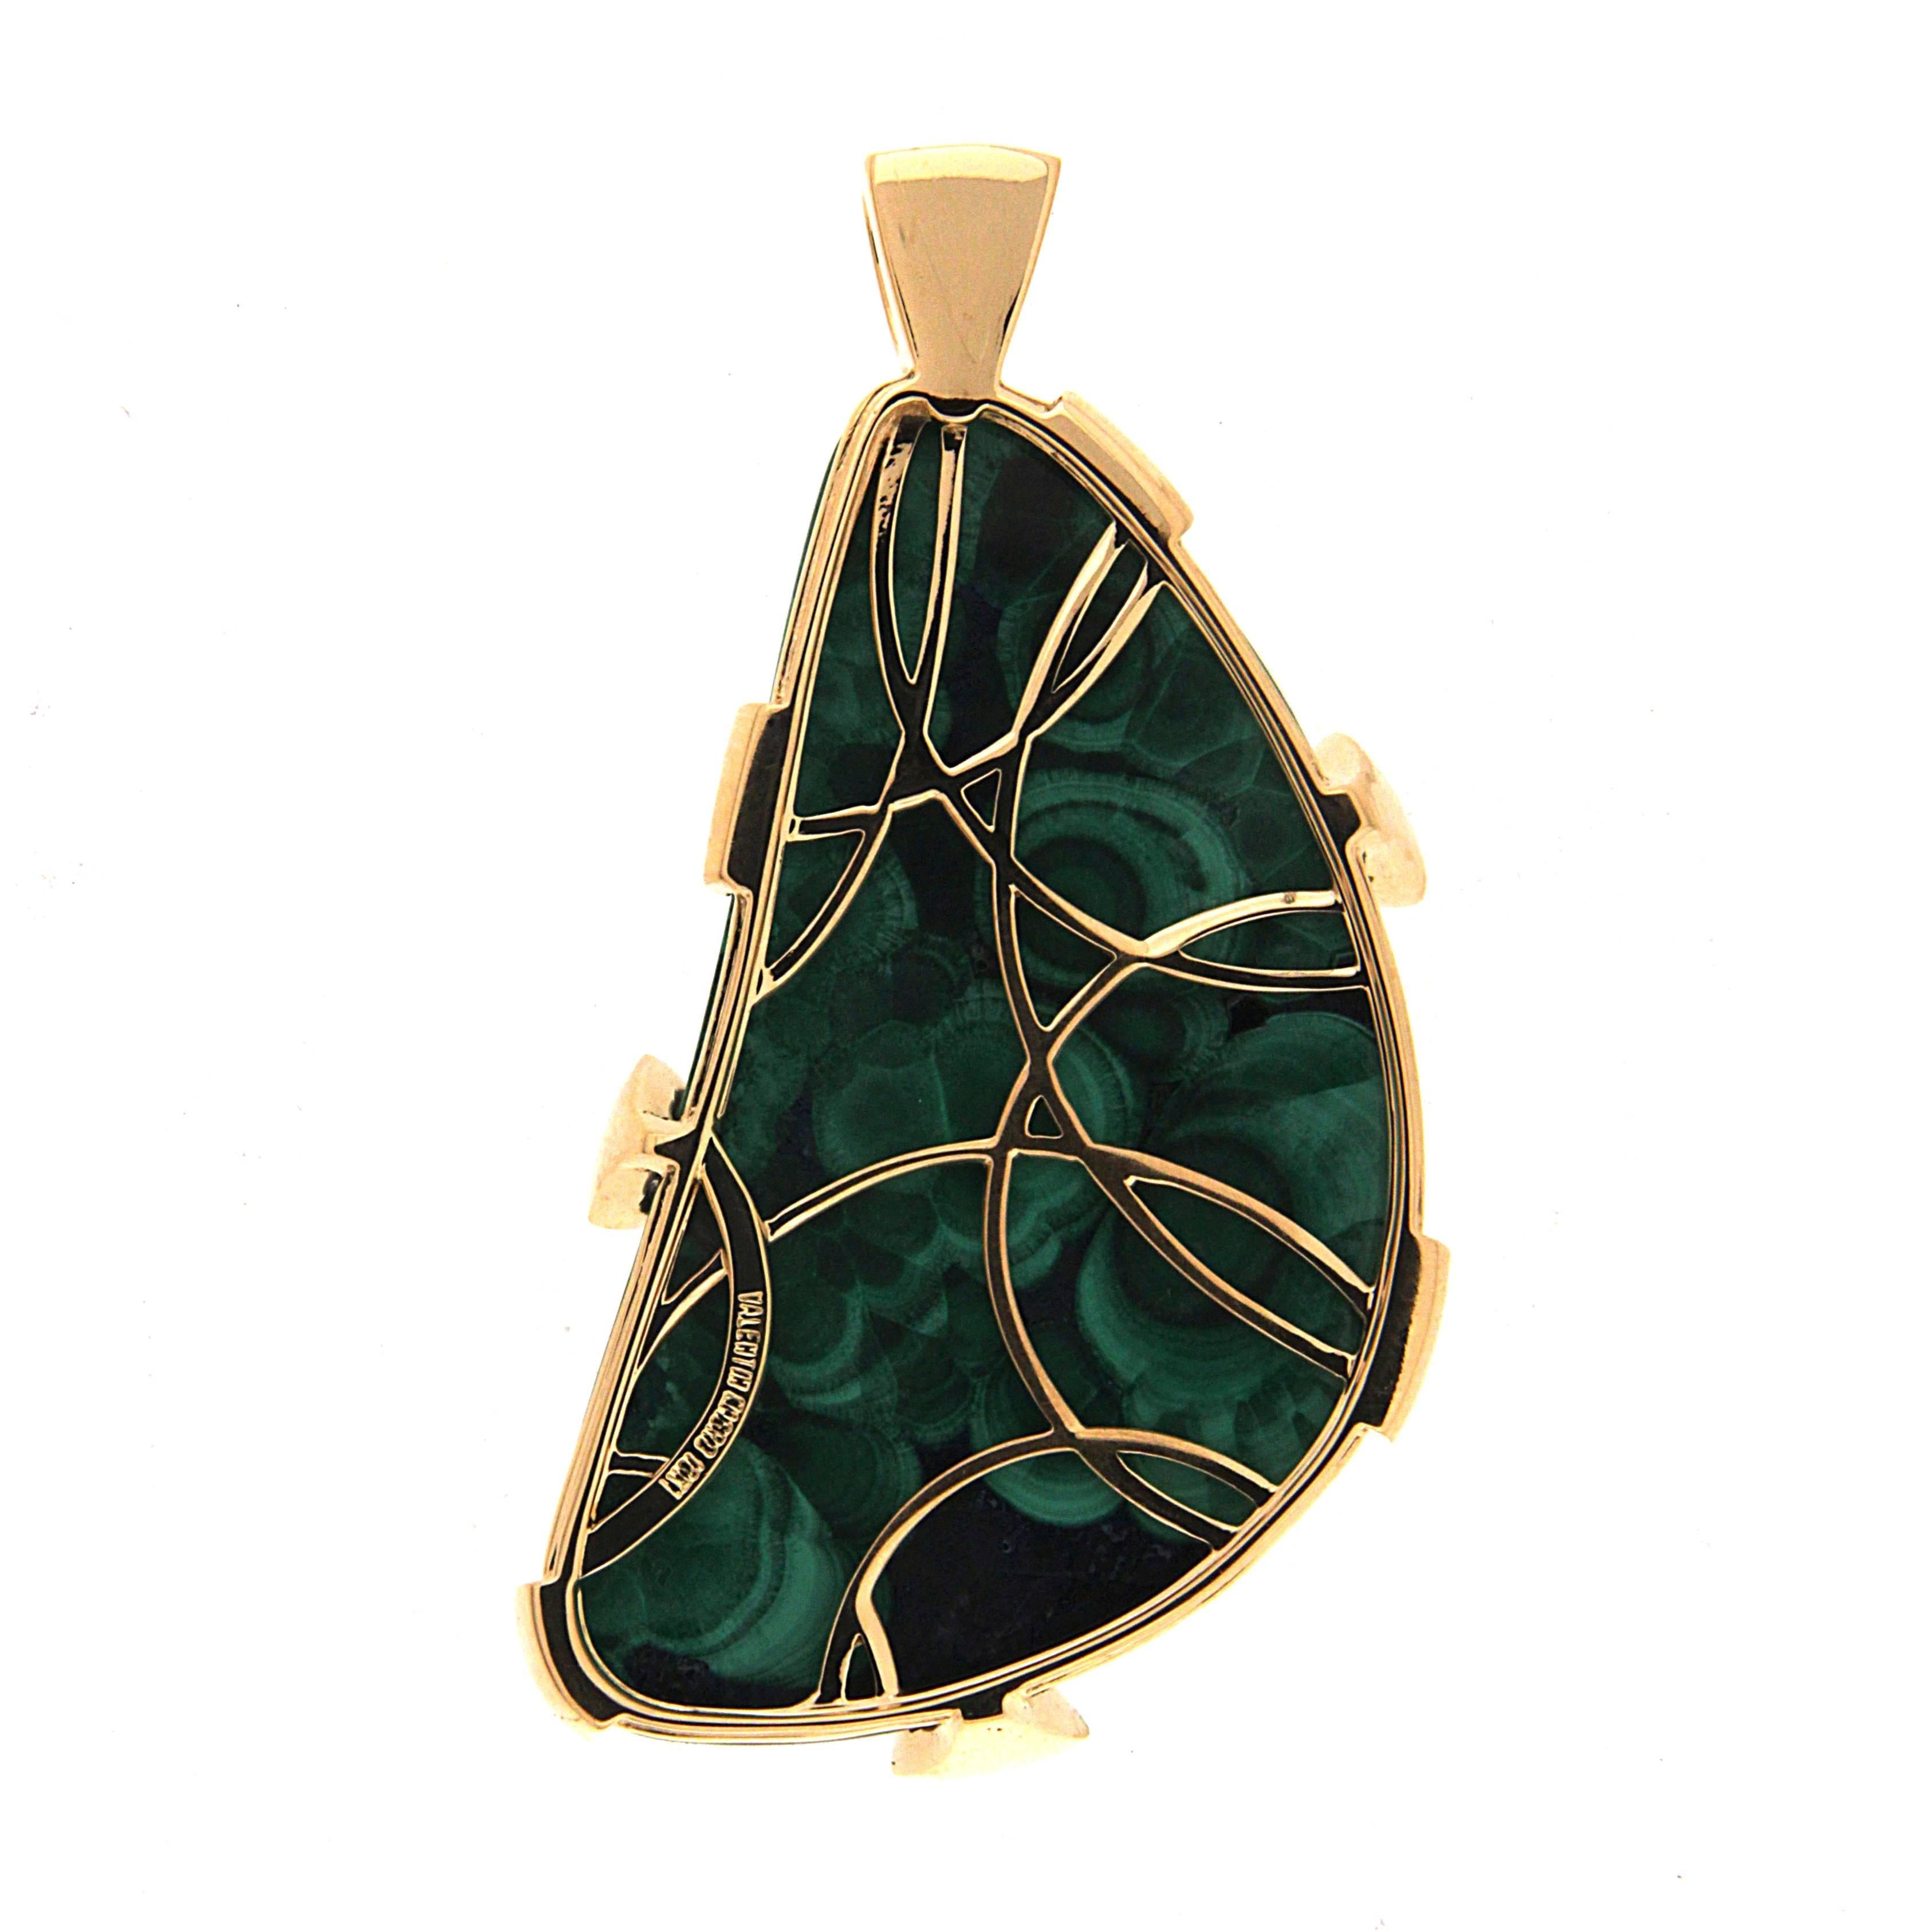 Two gems merge into one in this pendant. Azurite is a dark blue, often opaque gem. Malachite is prized for its banded greens. They both form in copper rich earth, sometimes in the same location, becoming a single rock. Here, malachite appears as